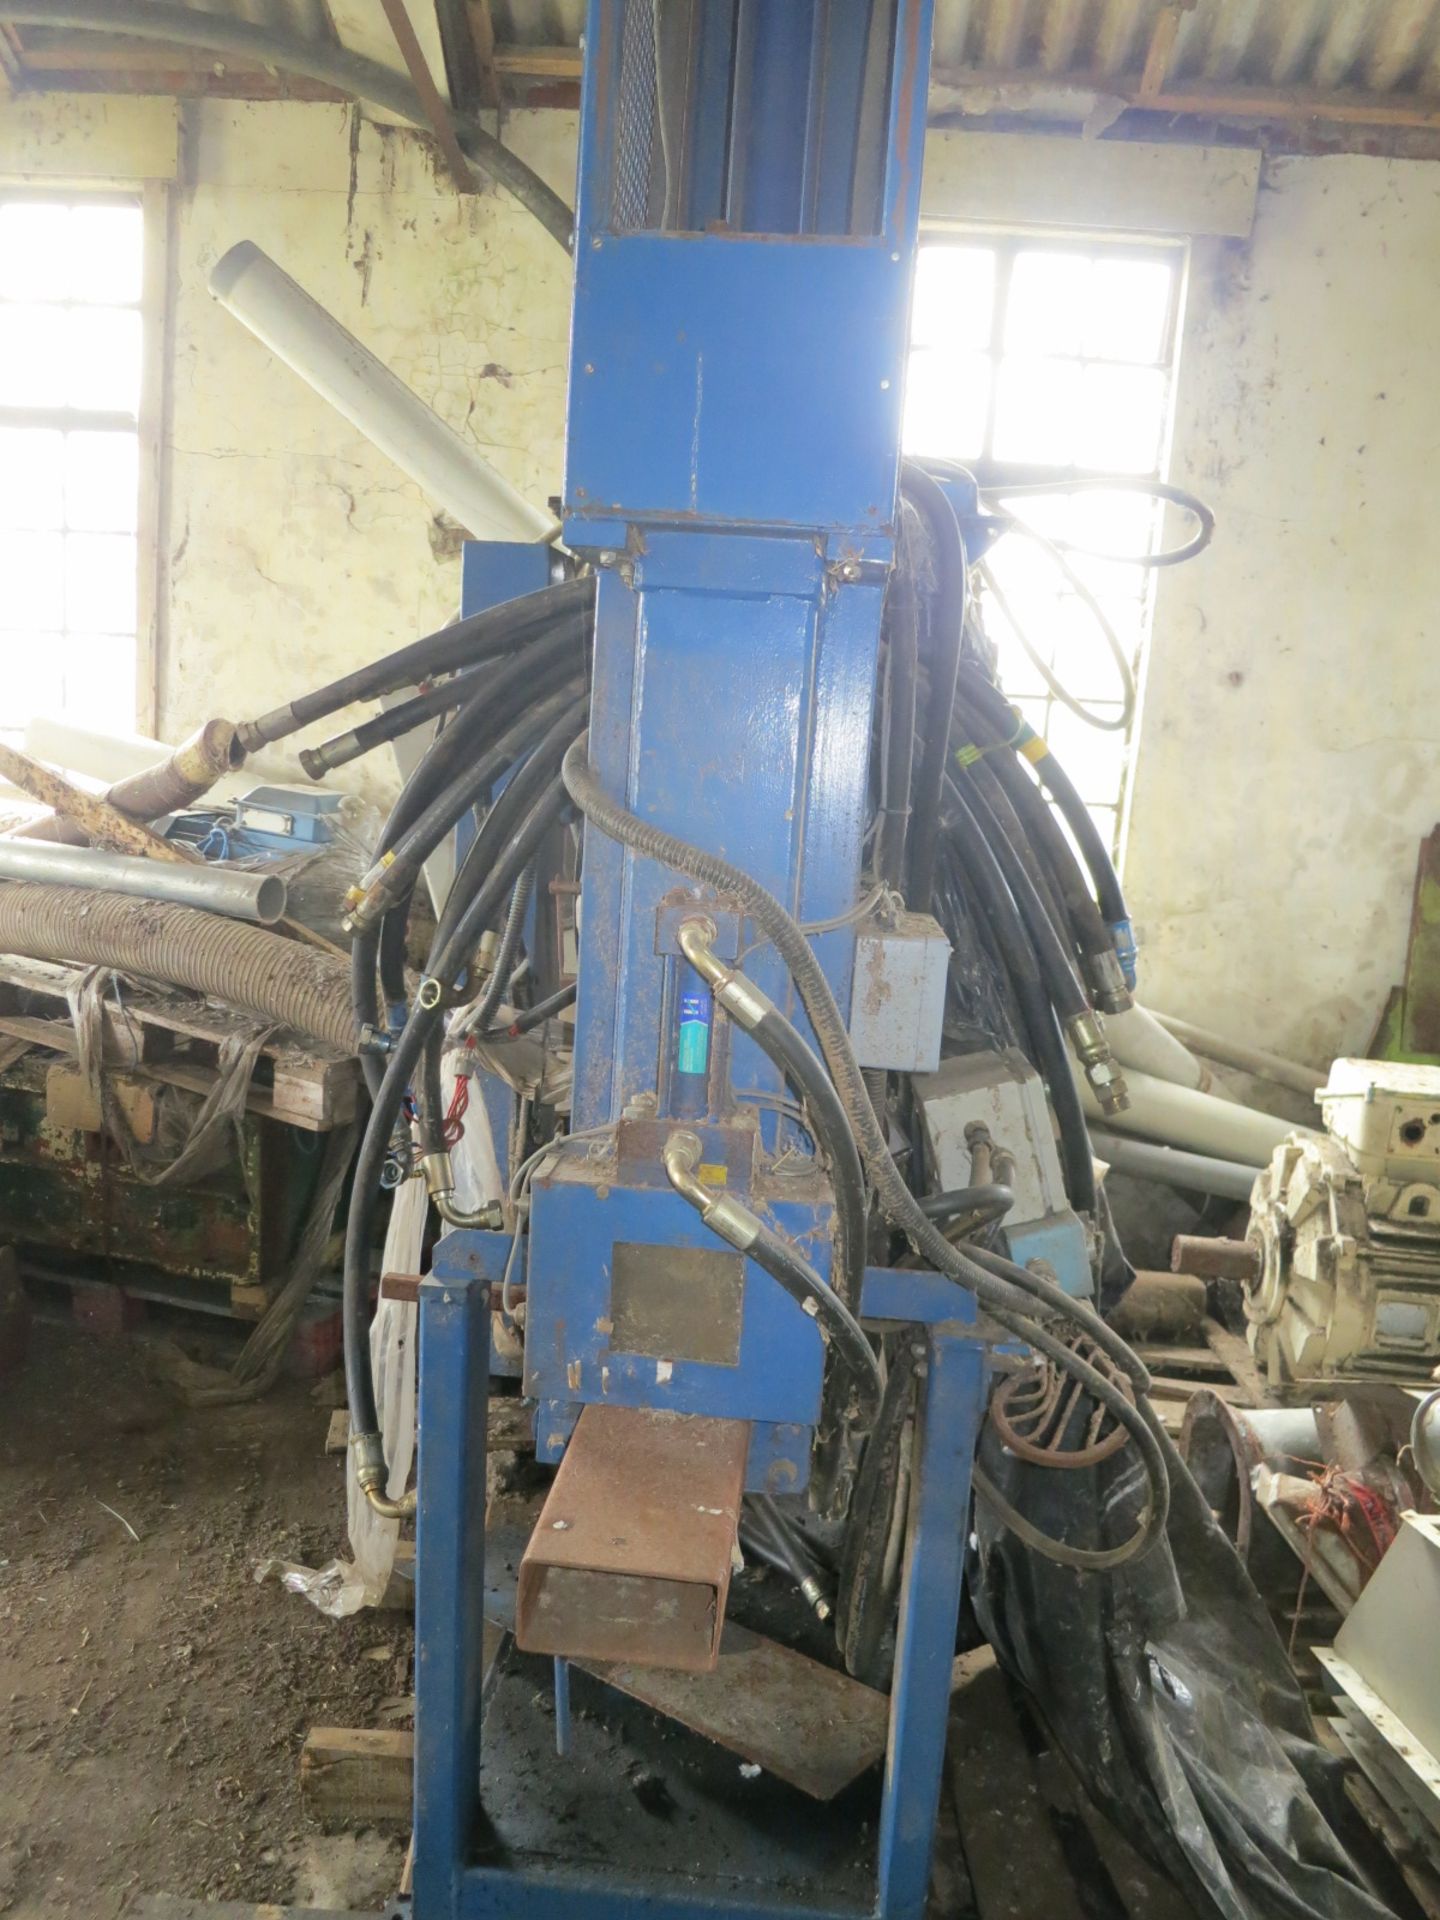 Shavings or Straw Balers - Small Pack Baler (believed to be by Bale-Pak), it is a three ram machine, - Image 2 of 4